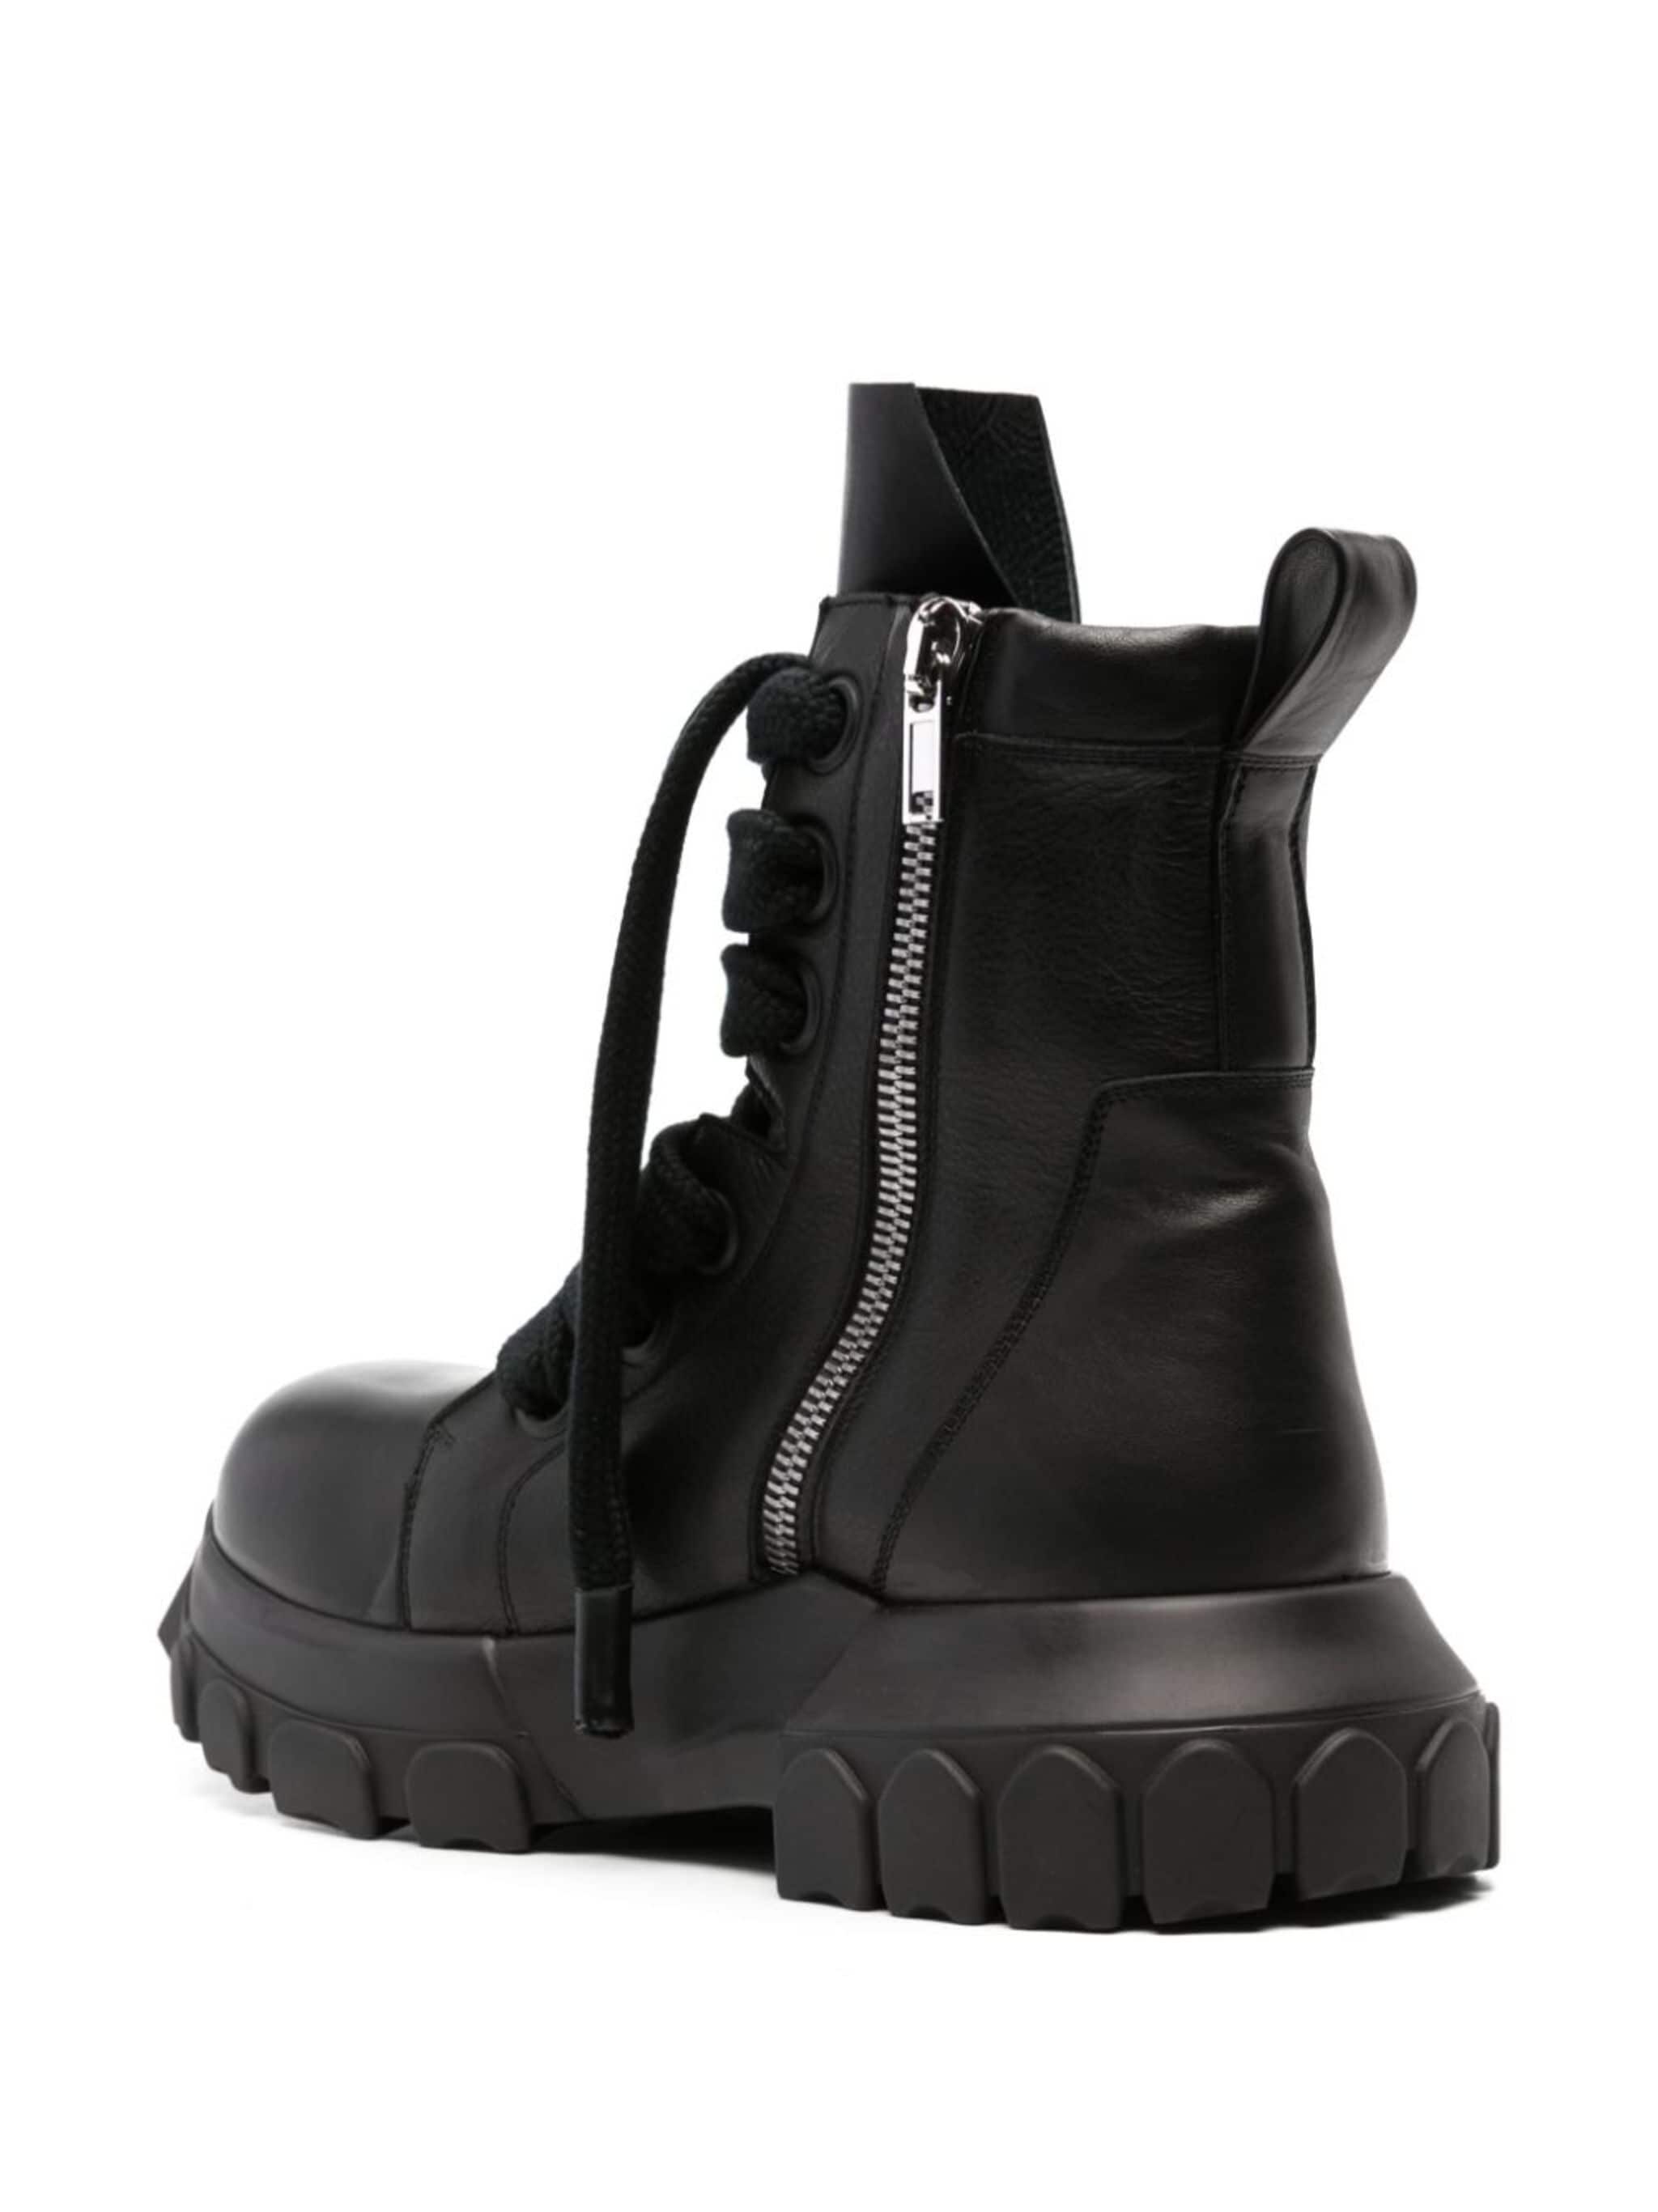 Bozo Tractor leather boots - 3